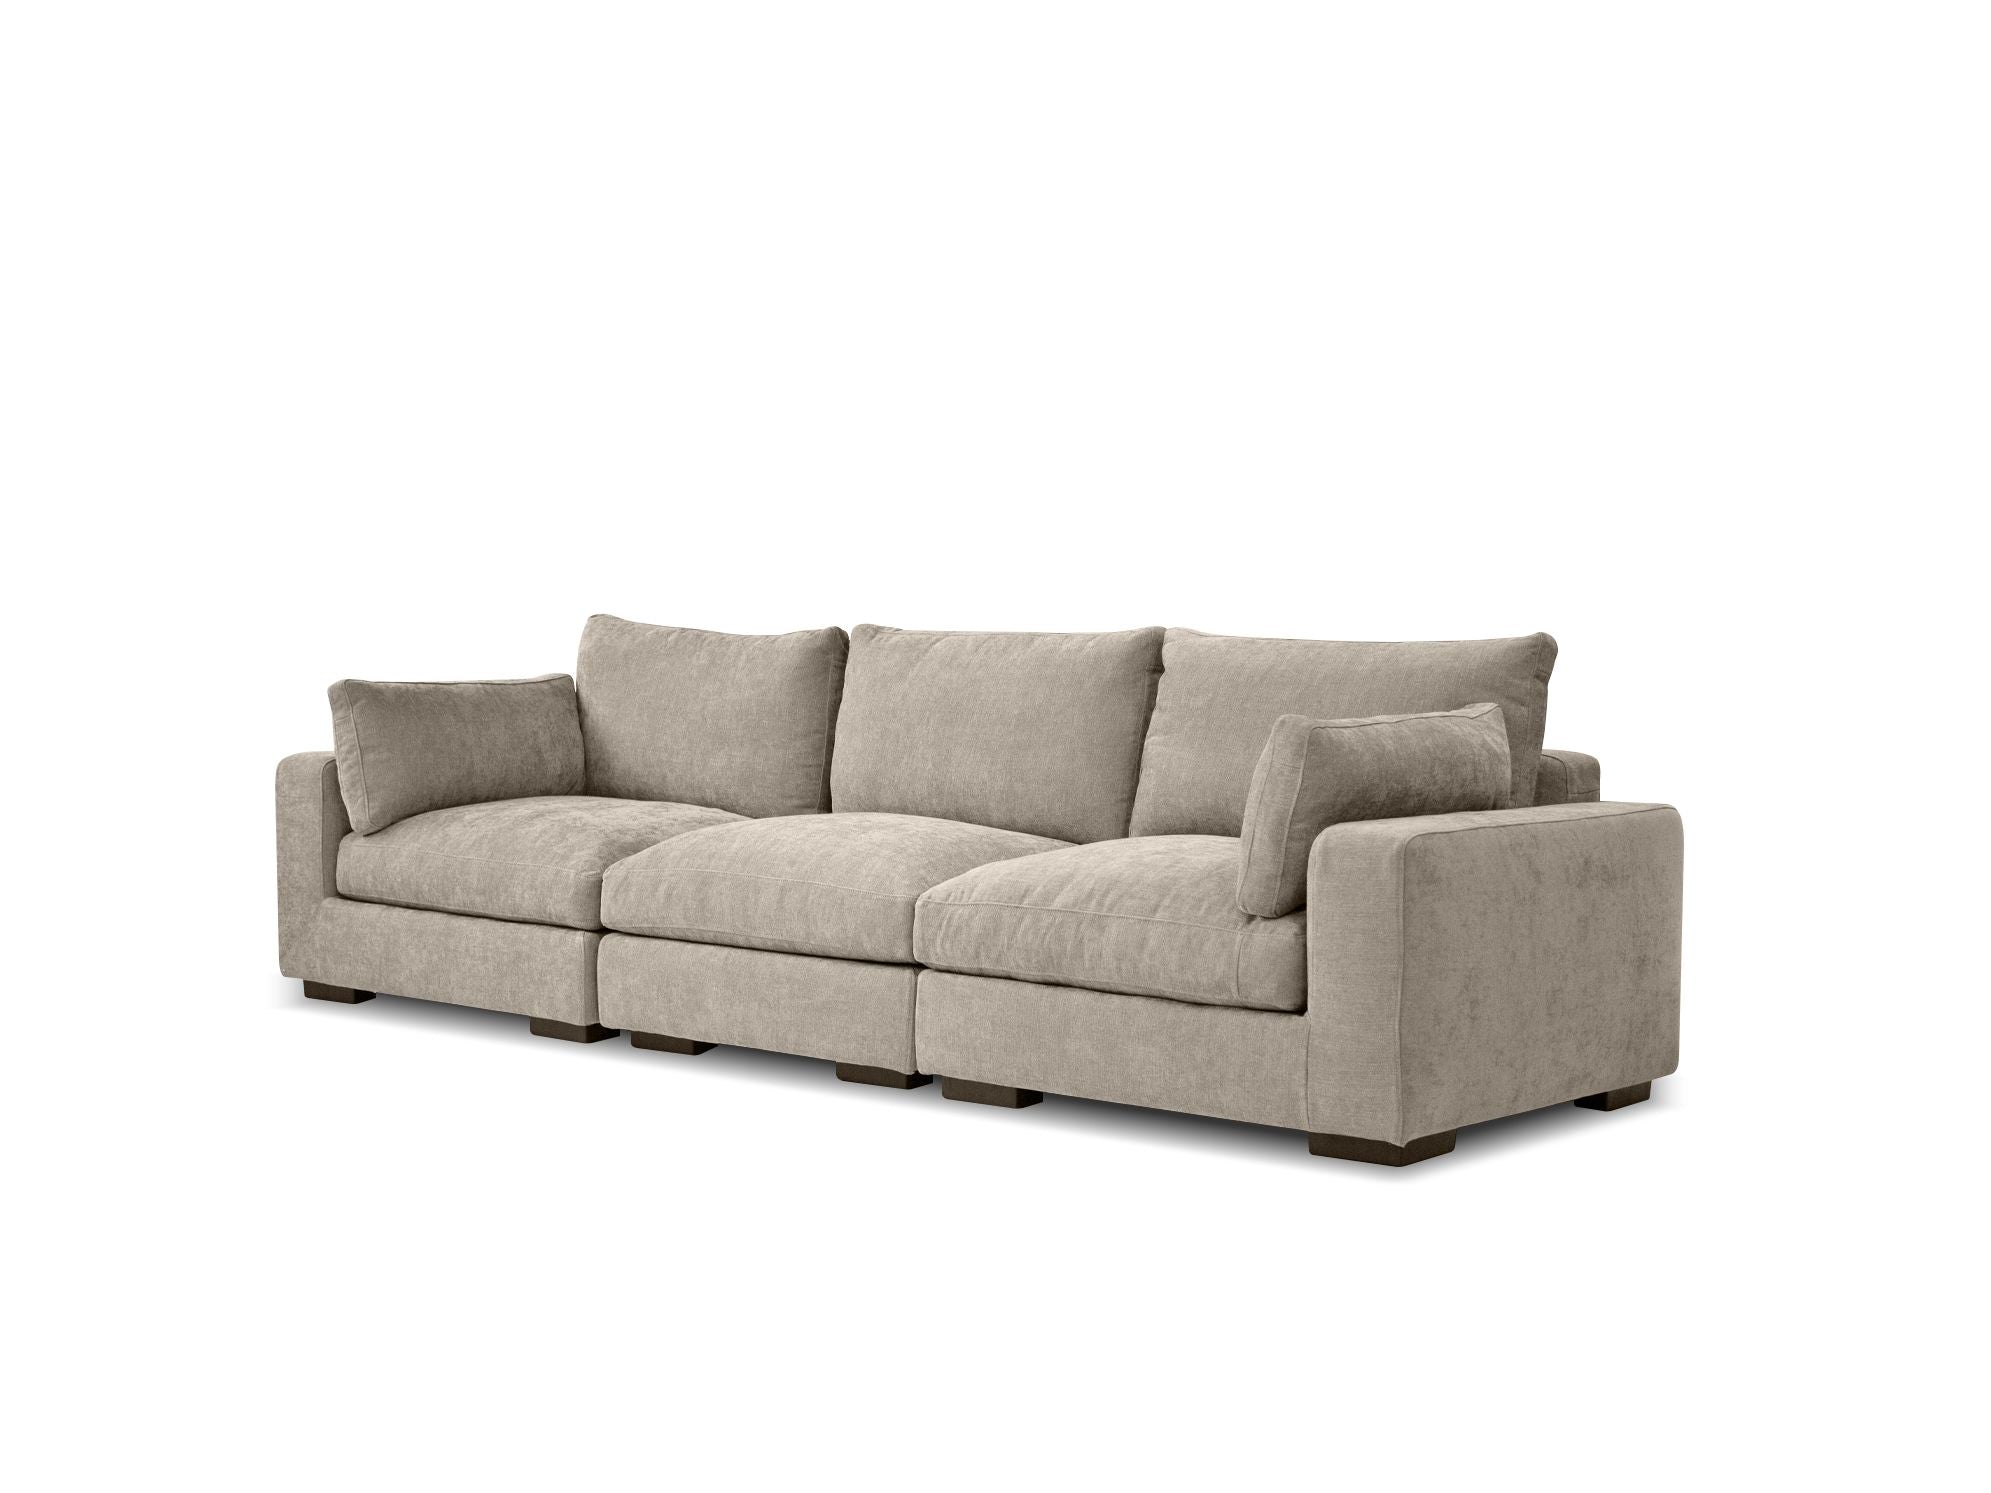 ONZA Fabric Sofa in Oyster